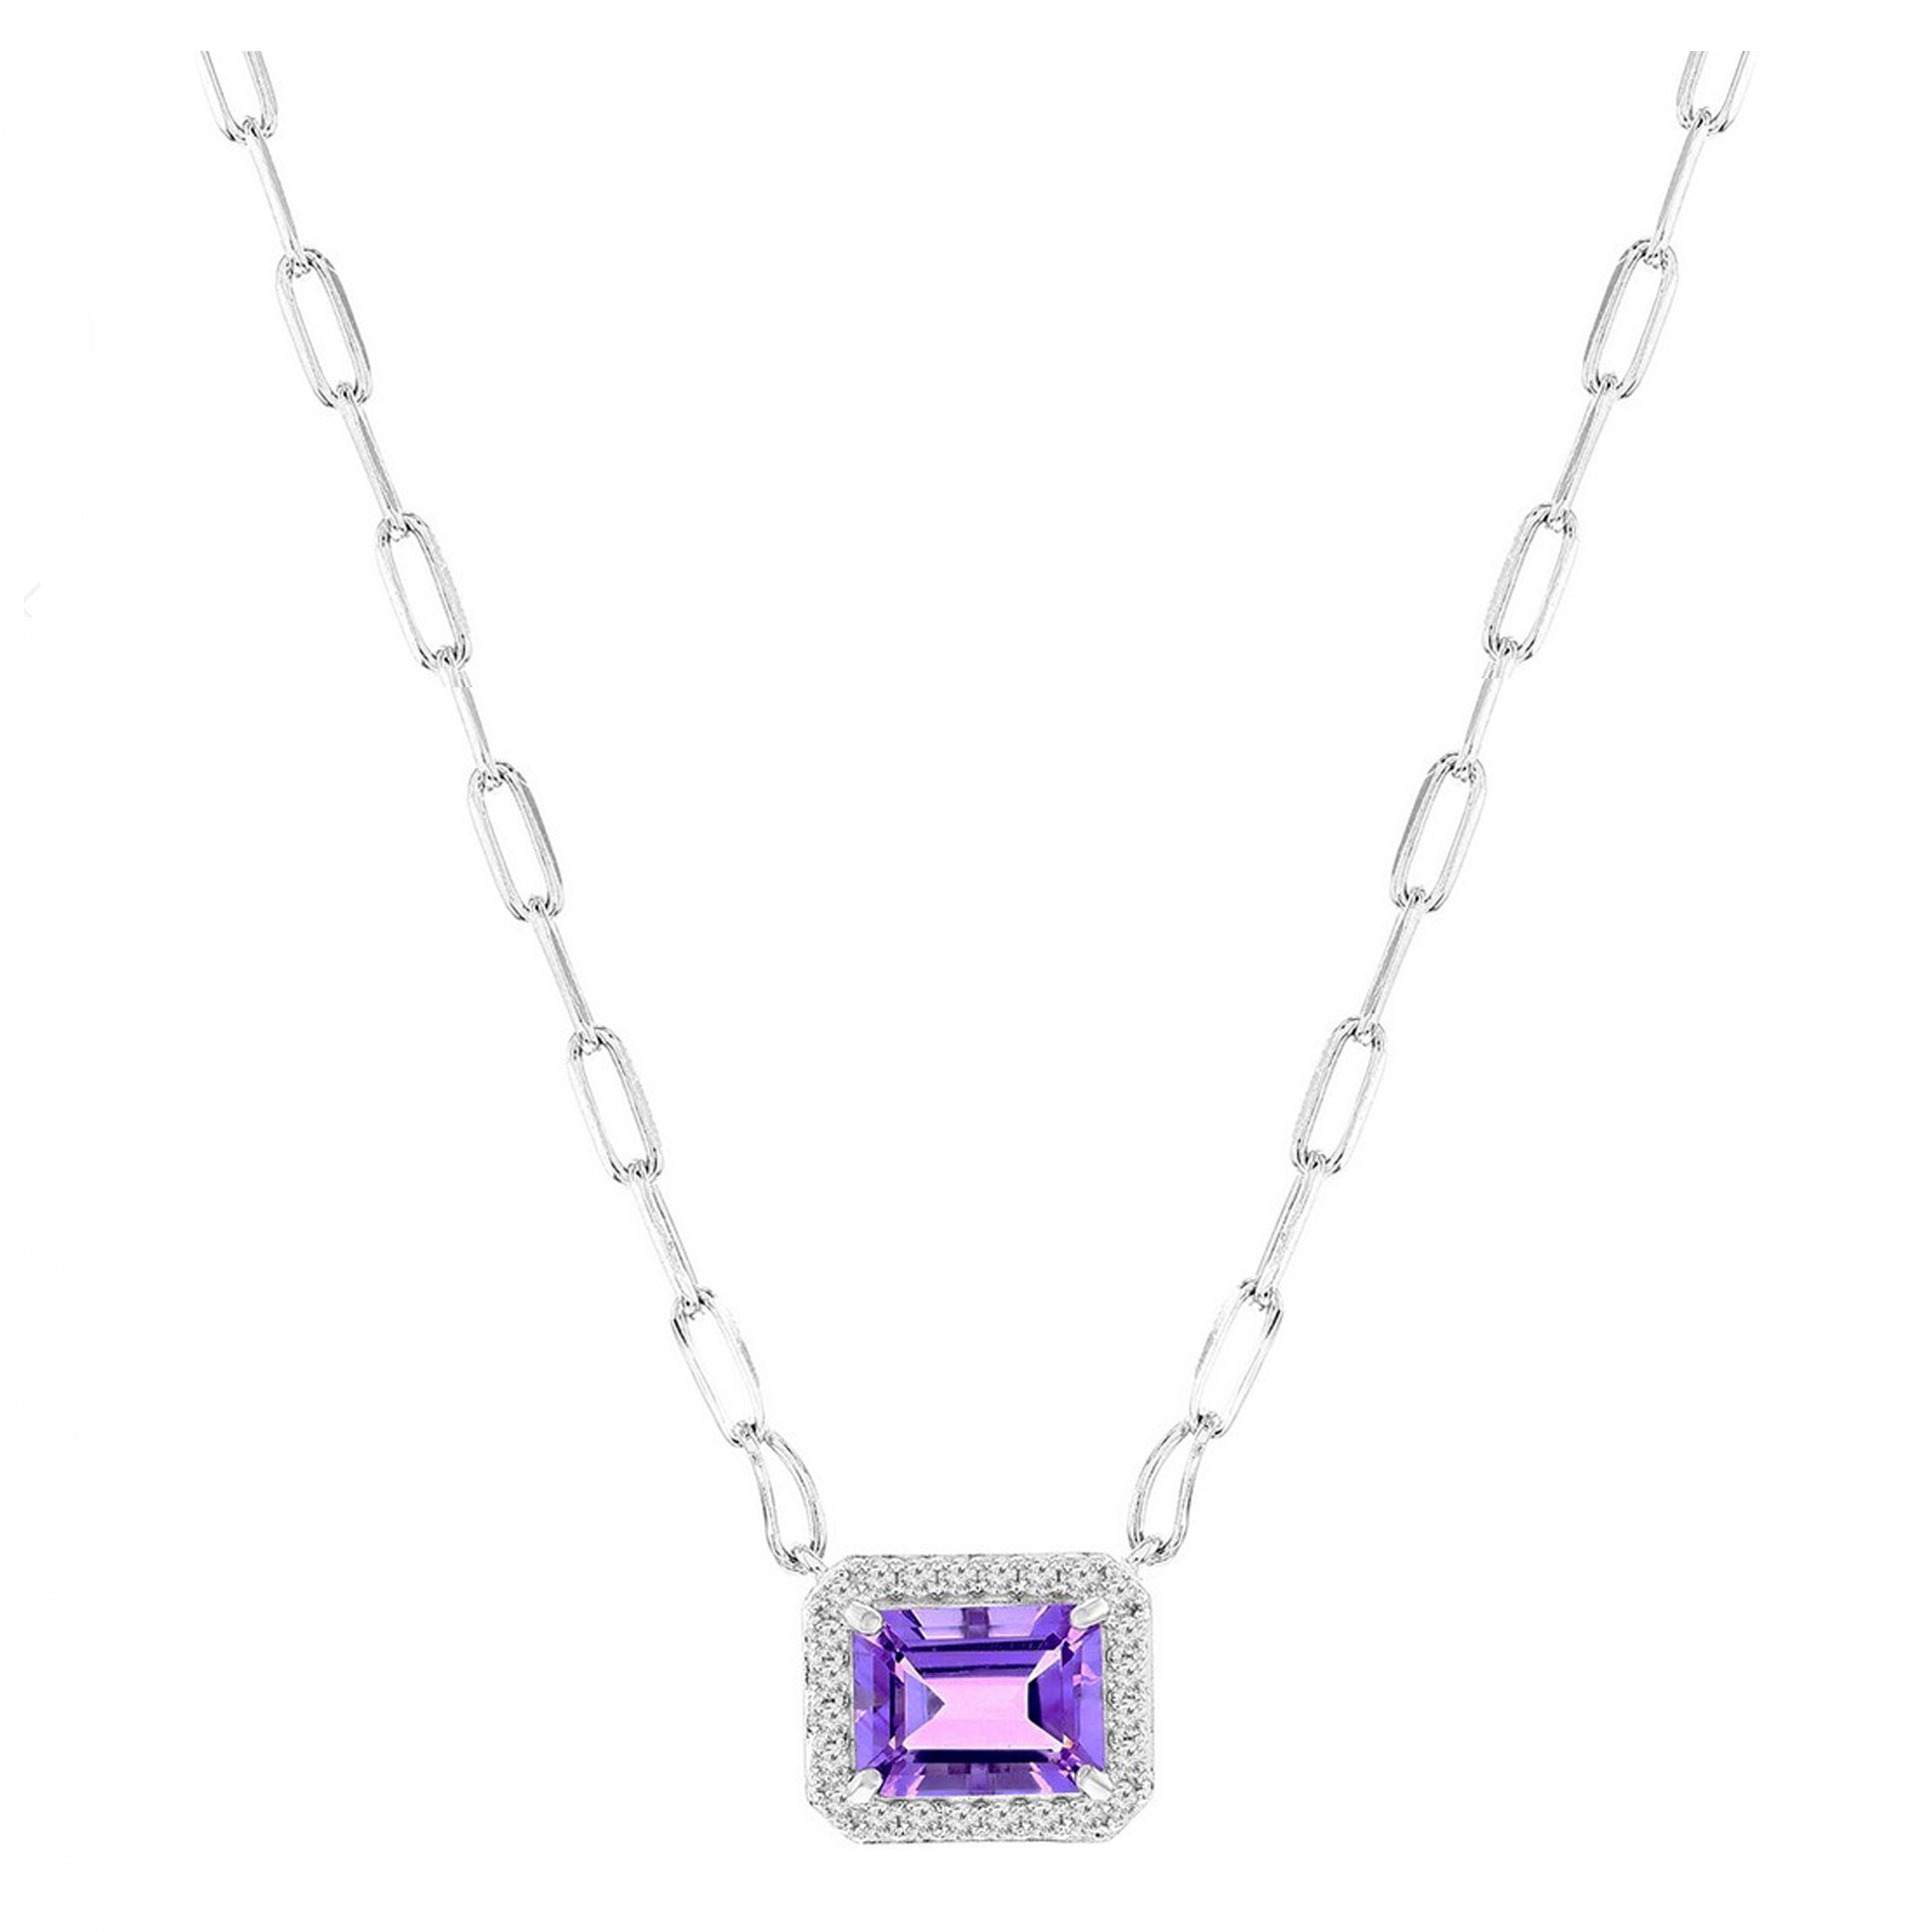 Rectangular Amethyst and White Topaz Halo Paperclip Necklace